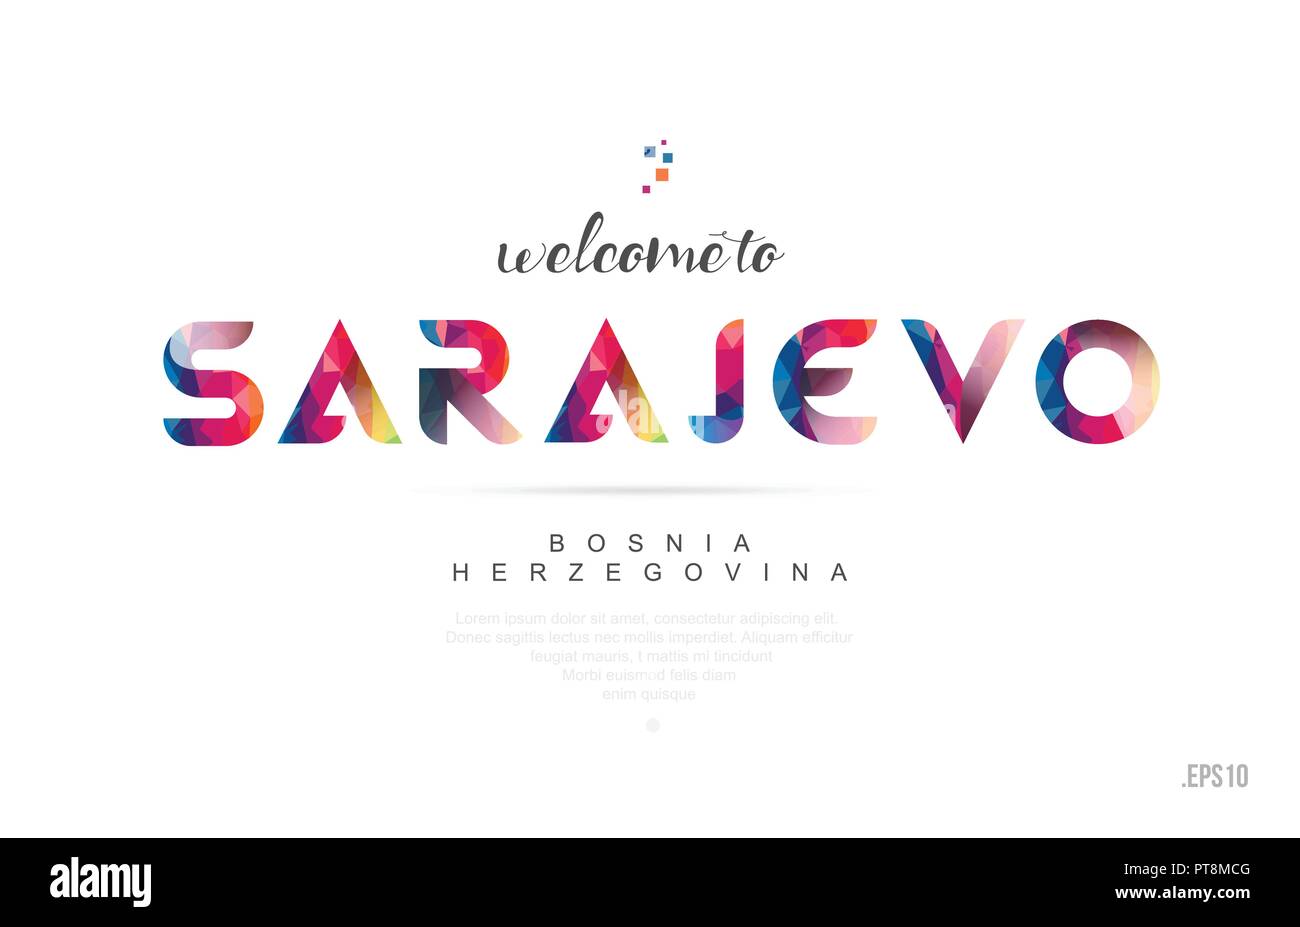 Welcome to sarajevo bosnia and herzegovina card and letter design in colorful rainbow color and typographic icon design Stock Vector